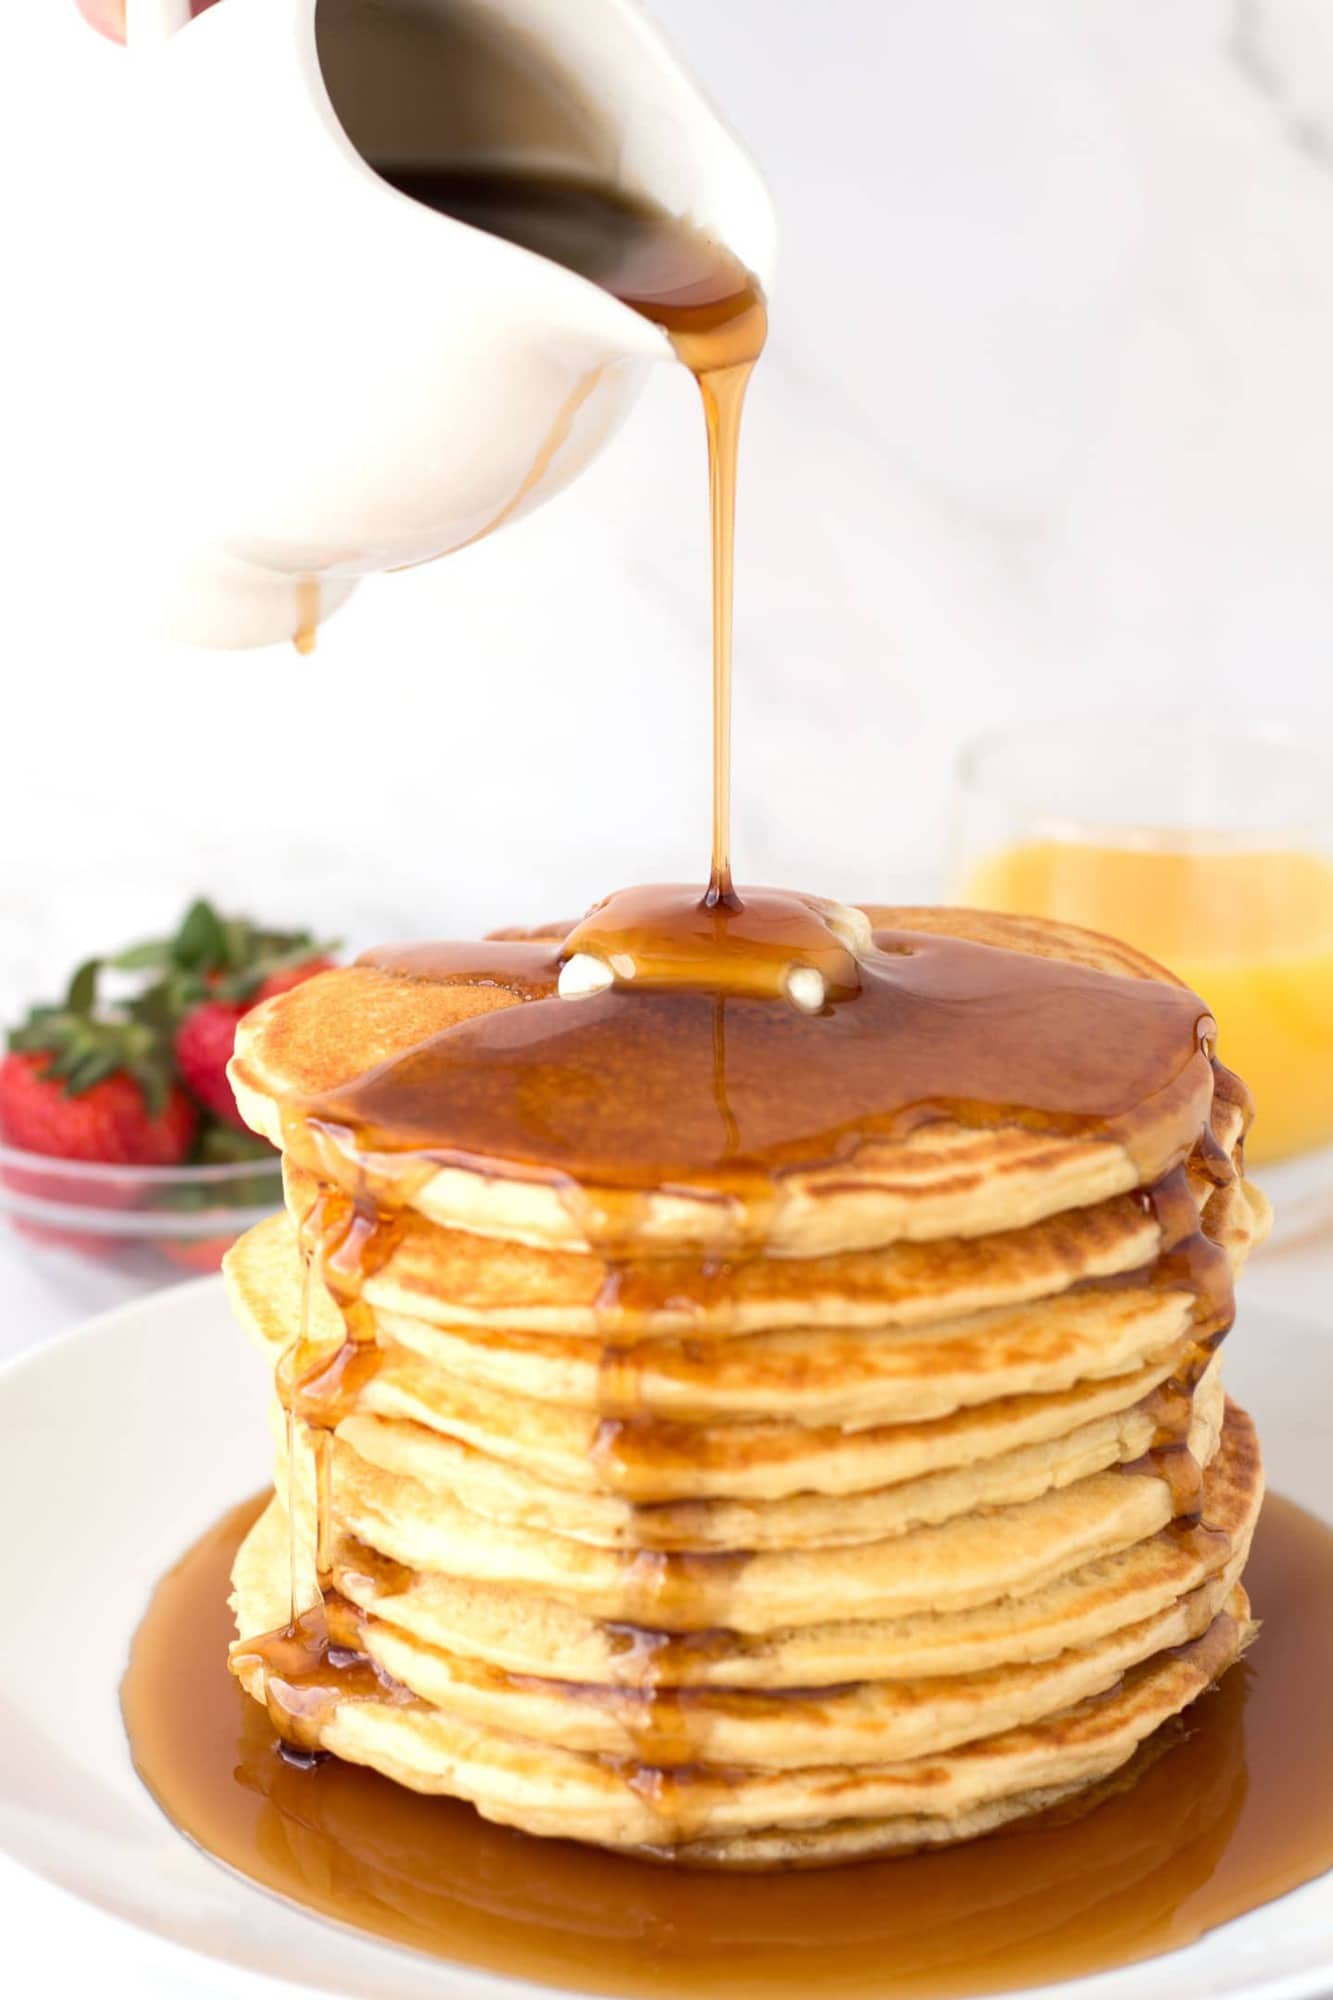 Pouring syrup on Famous Farm Pancakes (with buttermilk)